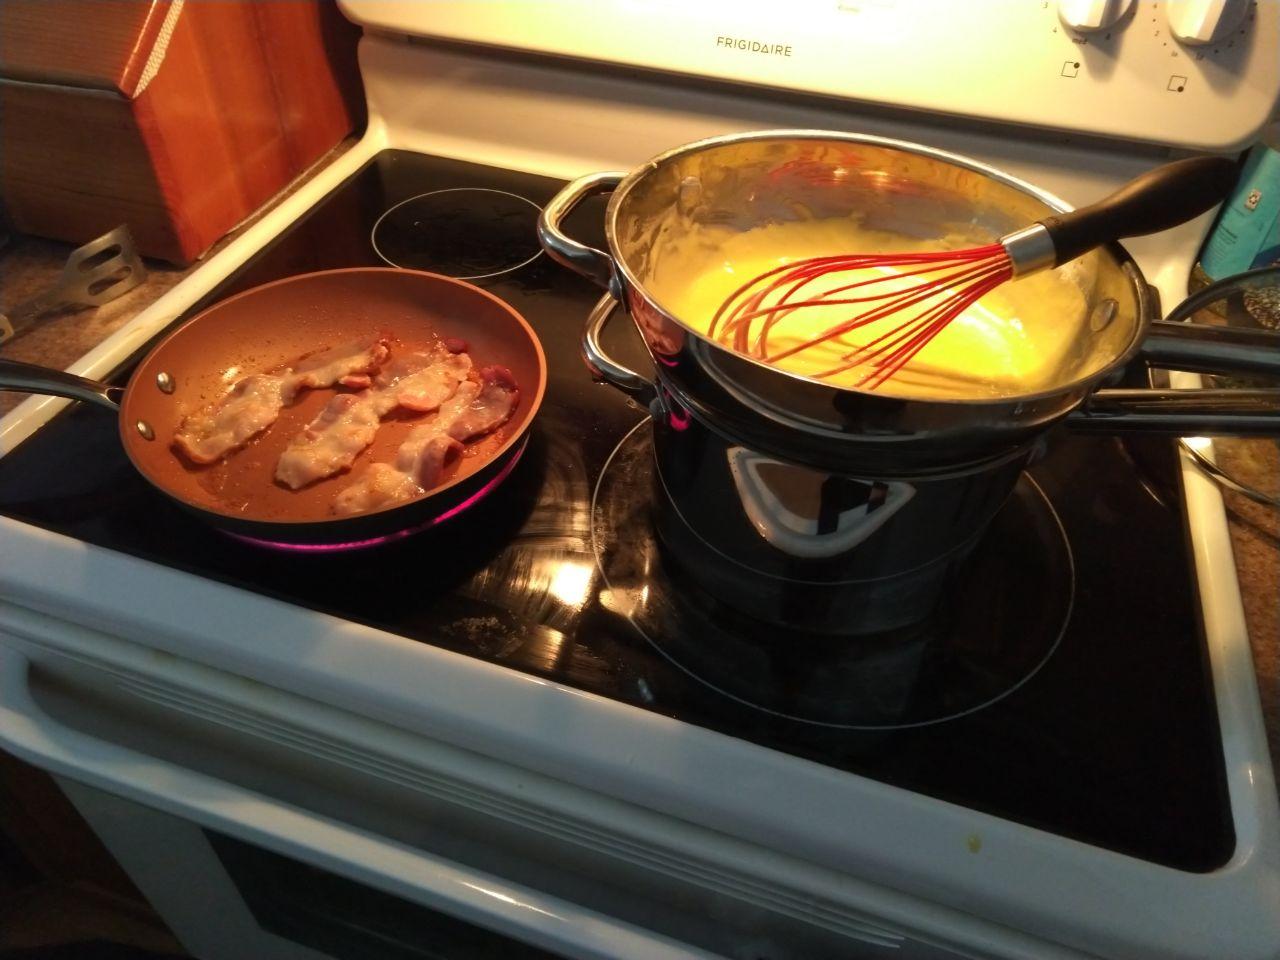 Hollandaise cooking in double boiler with bacon frying in a pan.